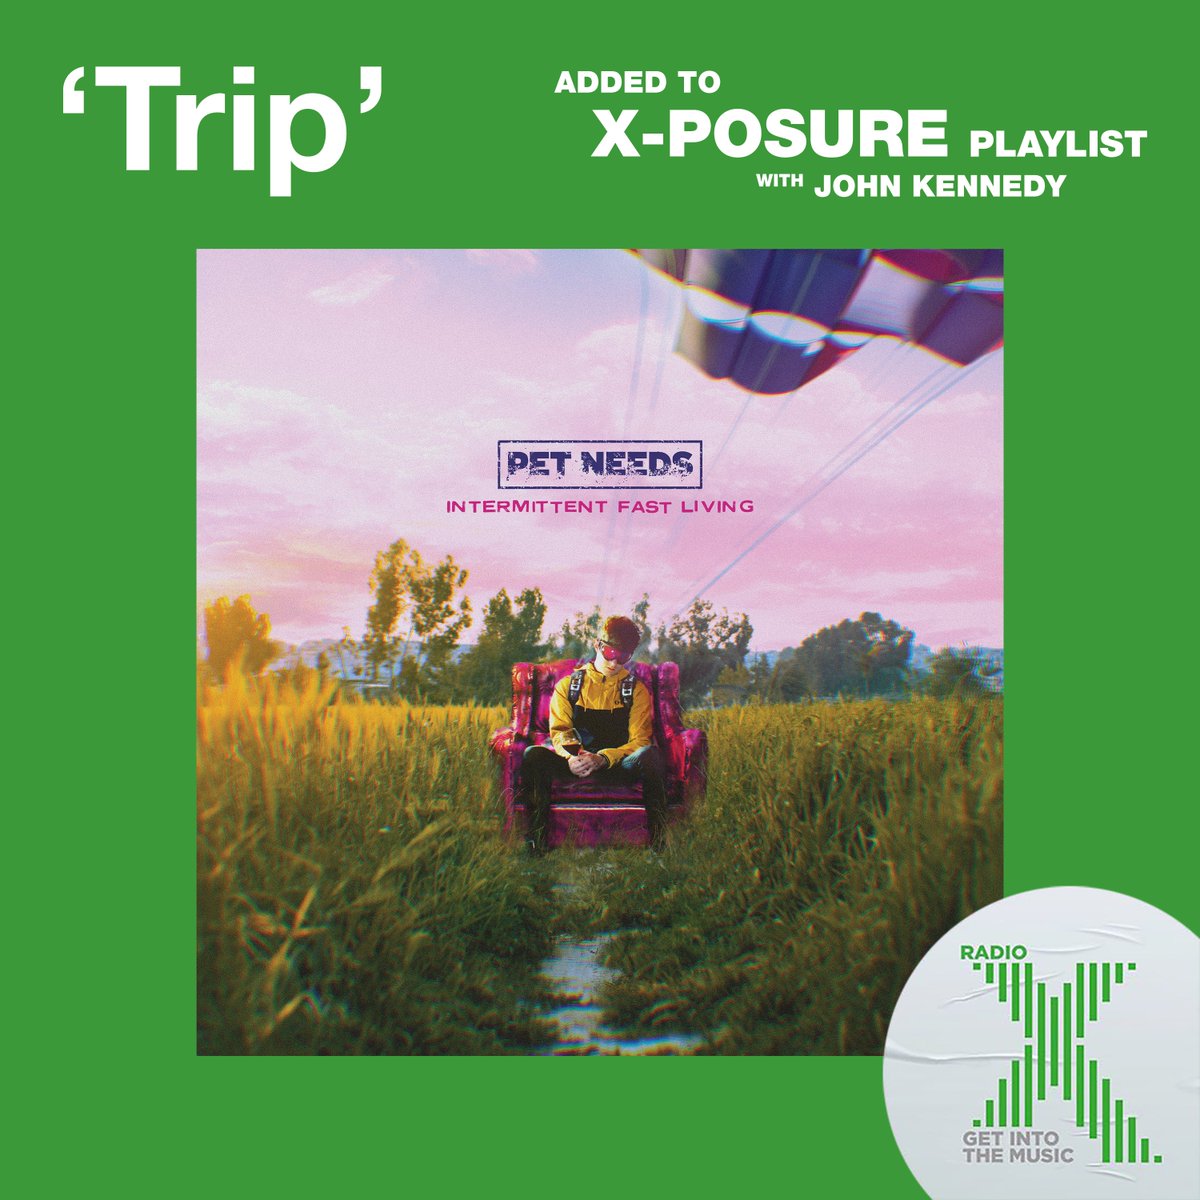 Loving the playlist adds for @wearepetneeds and @tomjenkins__ this week. Thanks @RadioX for adding PET NEEDS' 'Trip' on the Xposure playlist and @BBCRadioWales for adding Tom Jenkins' 'Blame It'. 🙌📻🔥